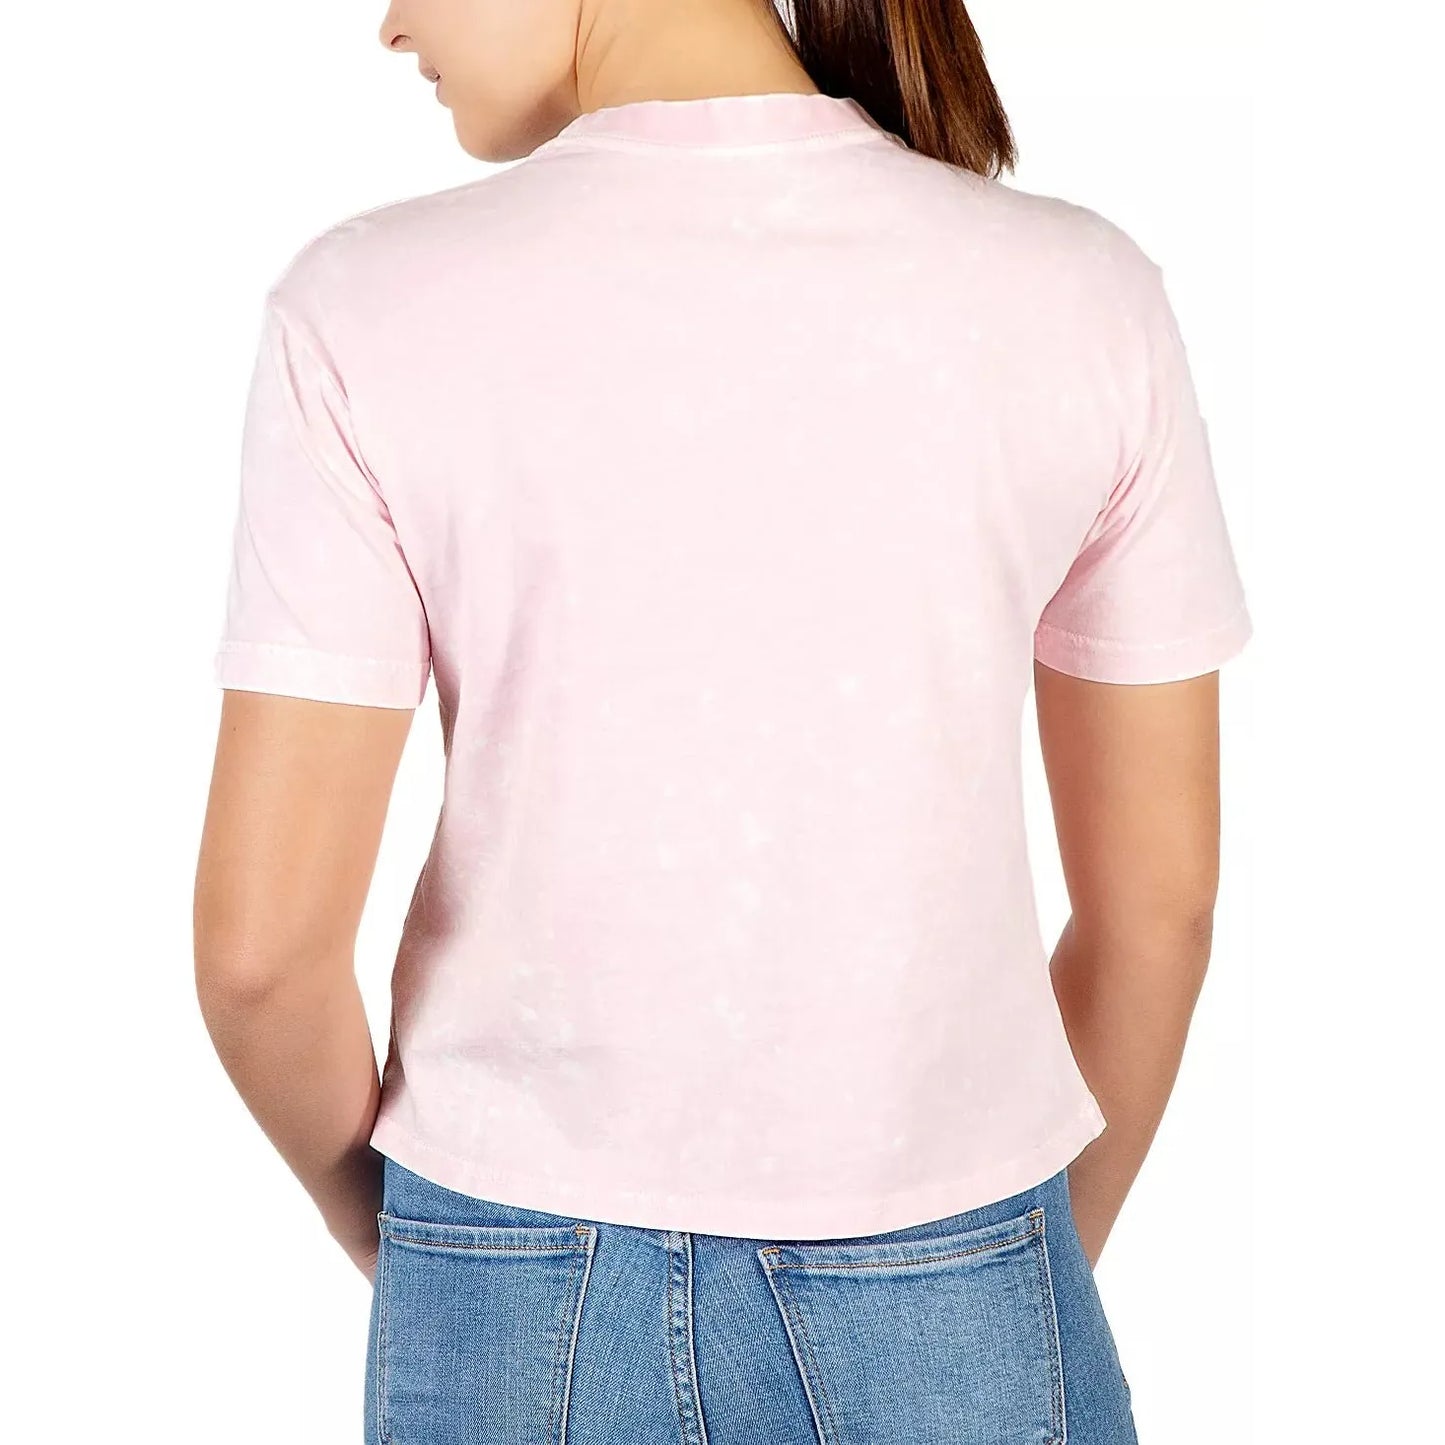 Rebellious-Rebellious One Juniors Grateful Mineral Wash T-Shirt, Pink, Size: M - Brandat Outlet